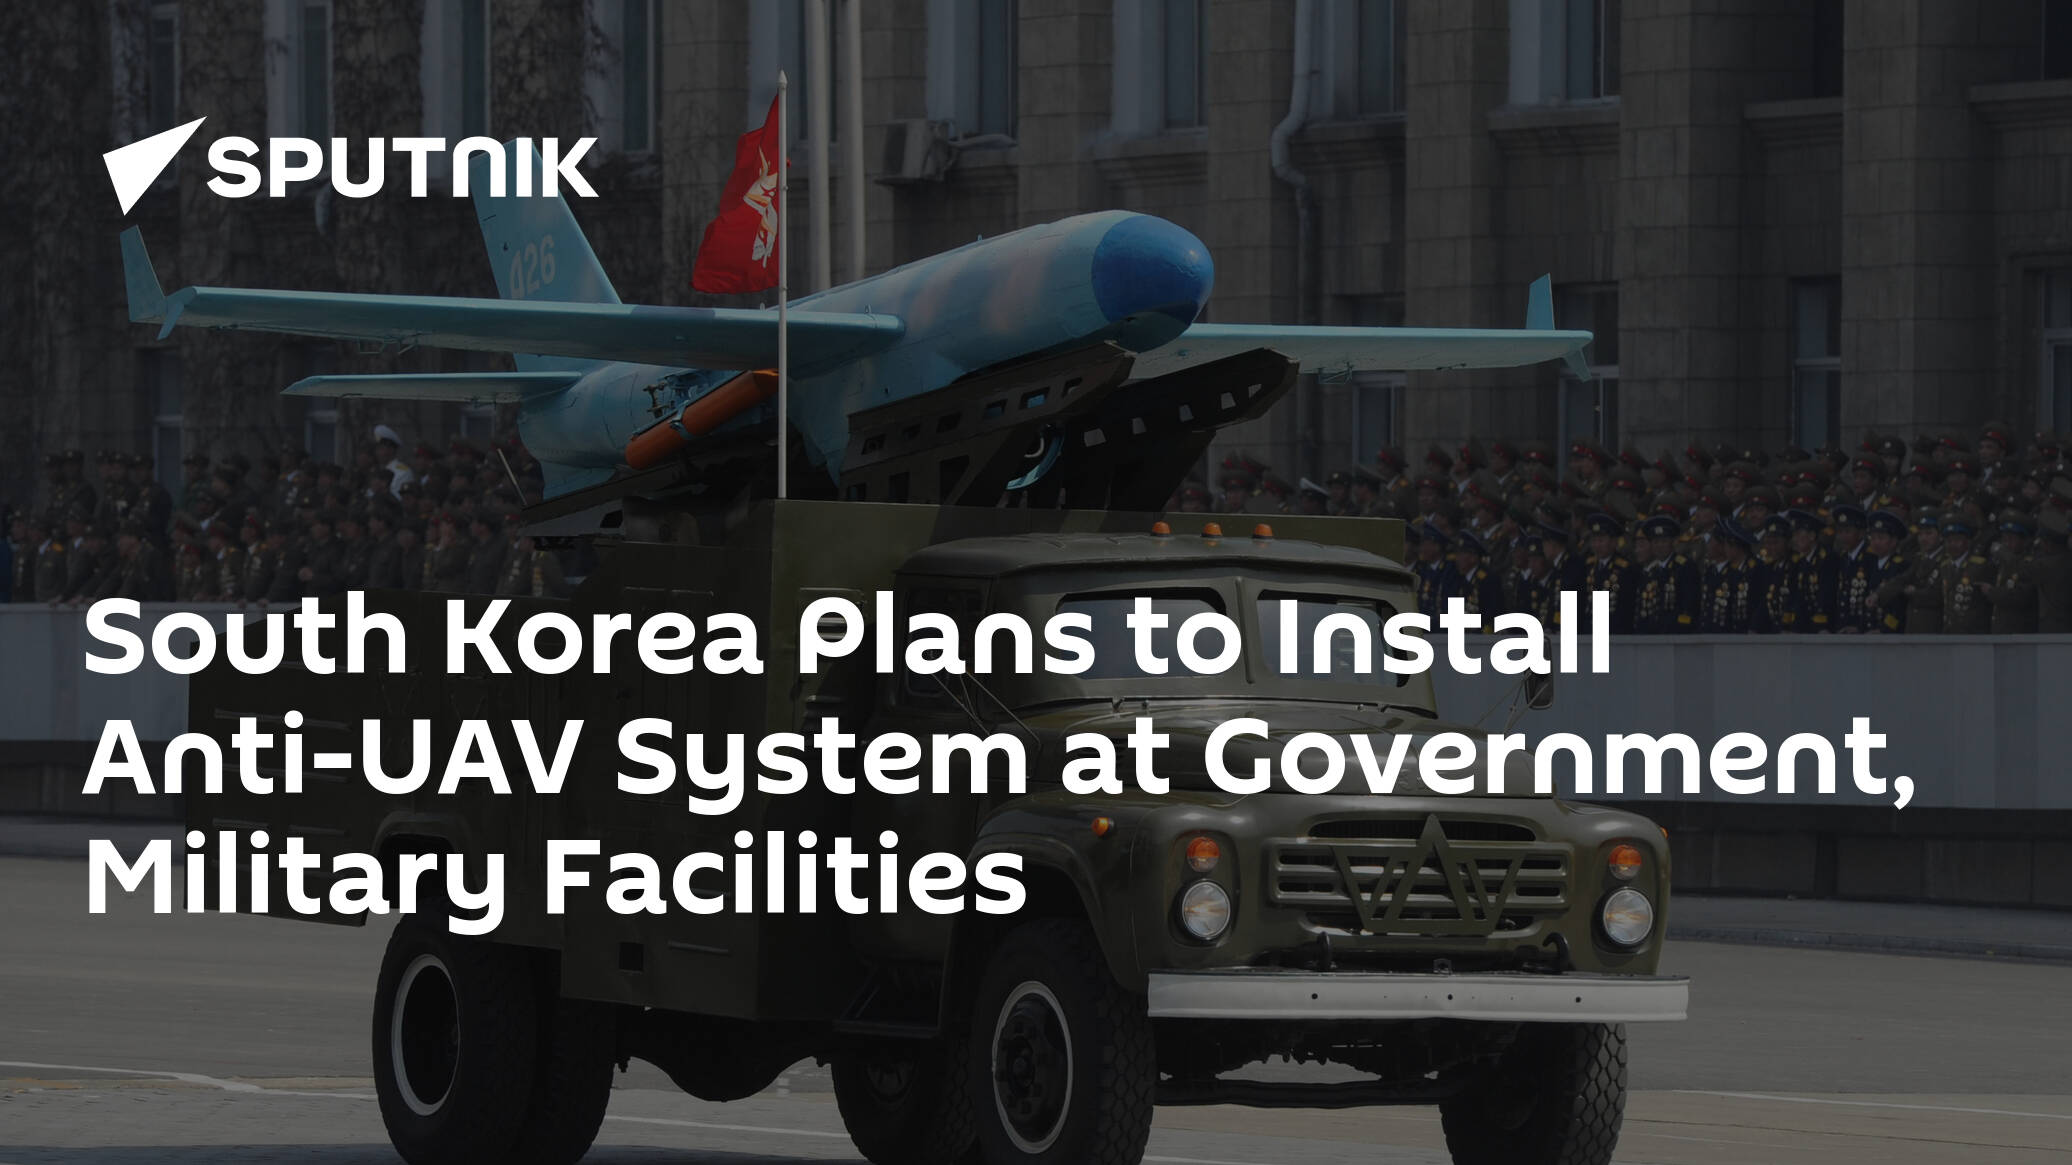 South Korea Plans to Install Anti-UAV System at Government, Military Facilities